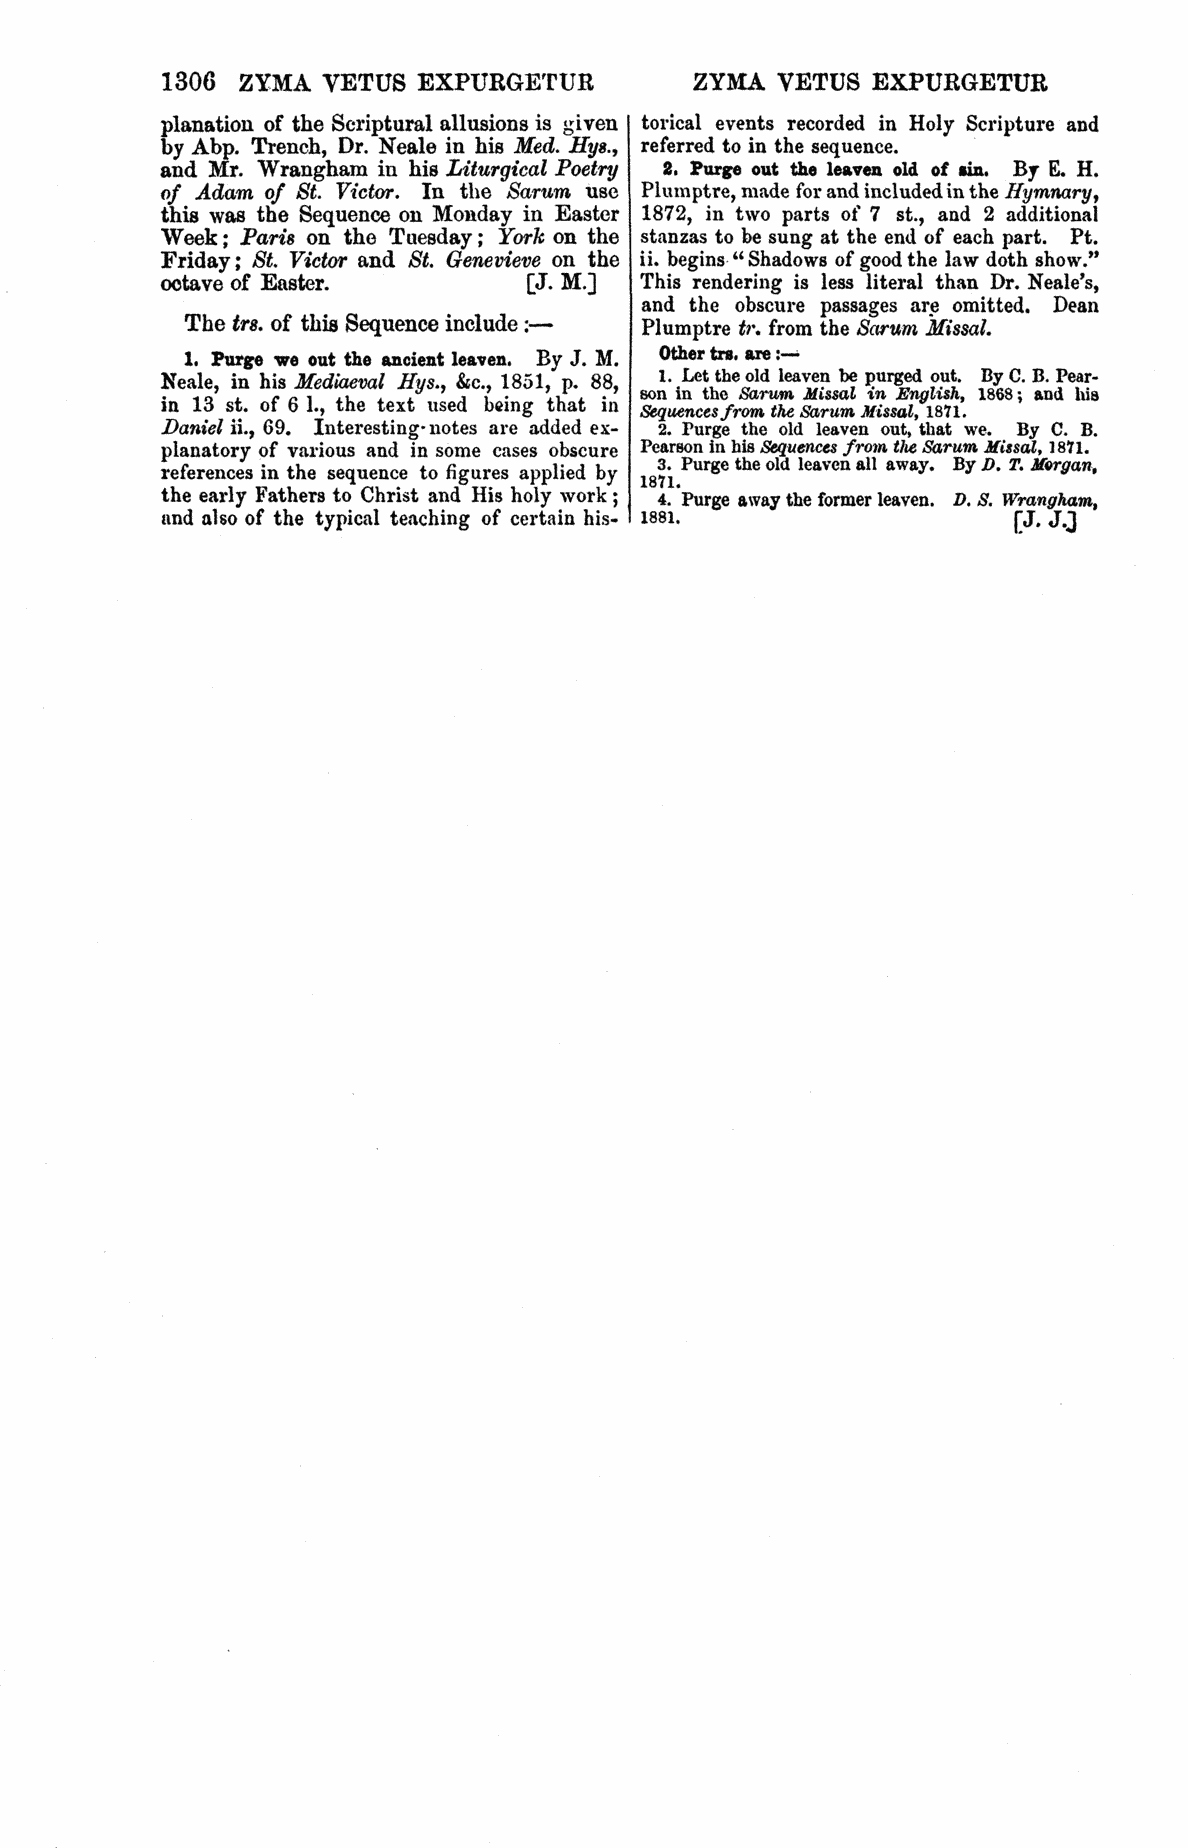 Image of page 1306